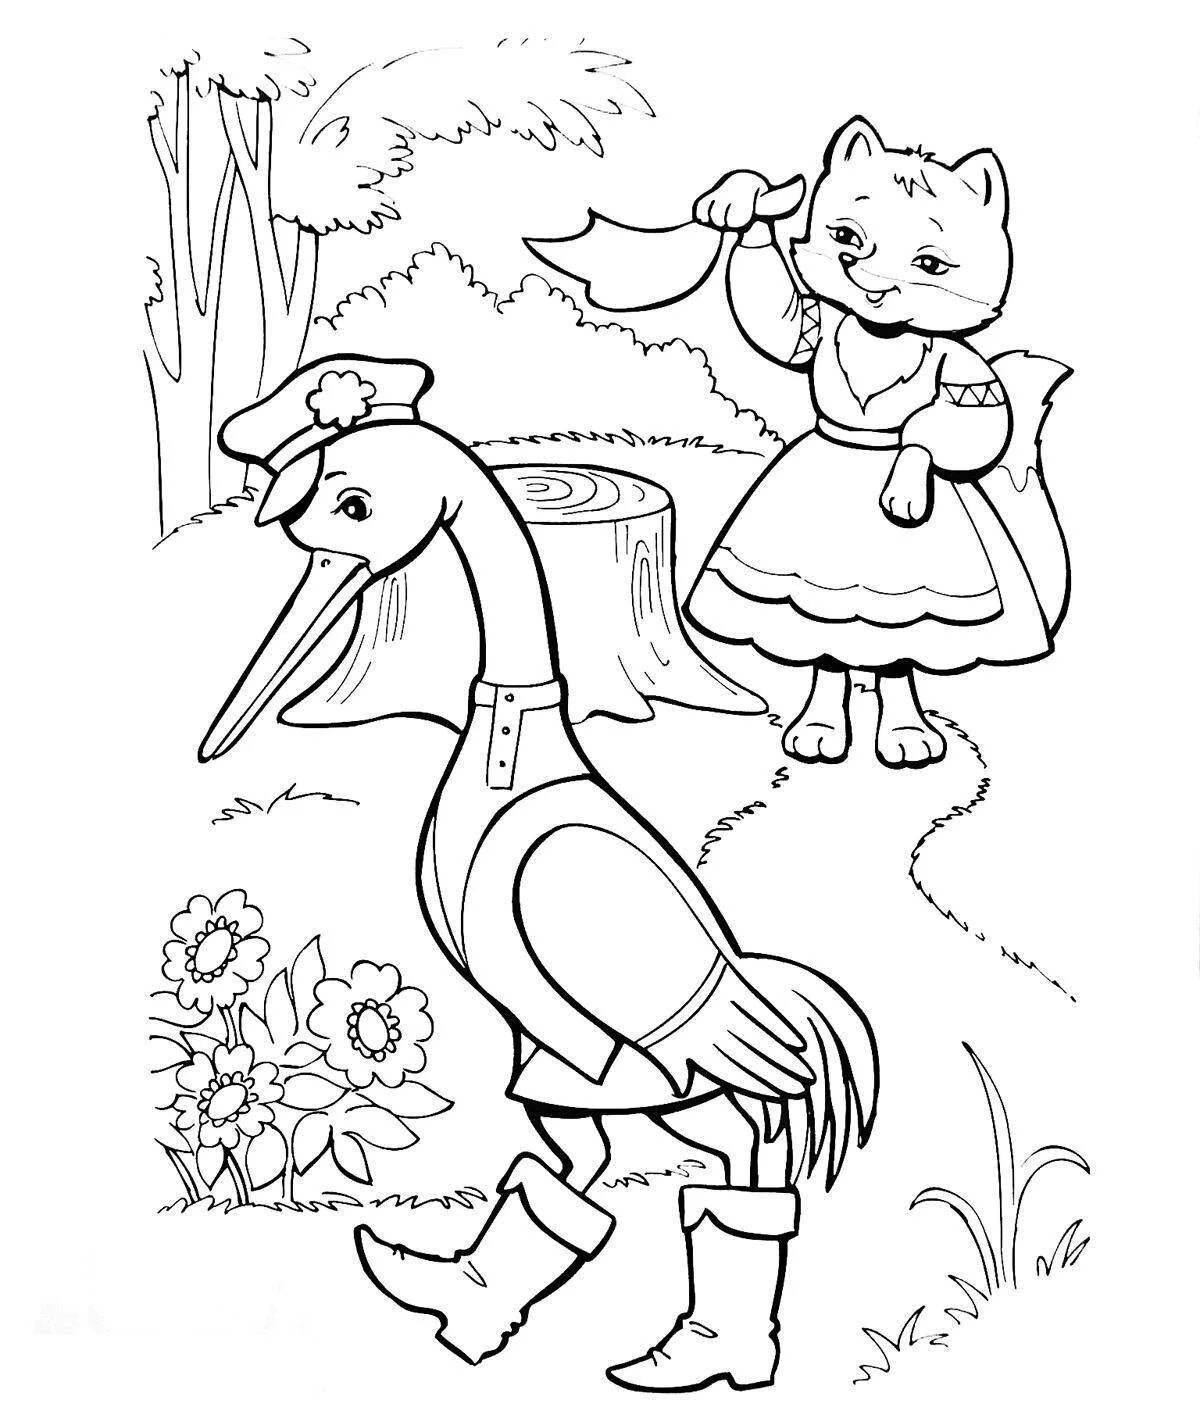 Fox and crane for kids #19